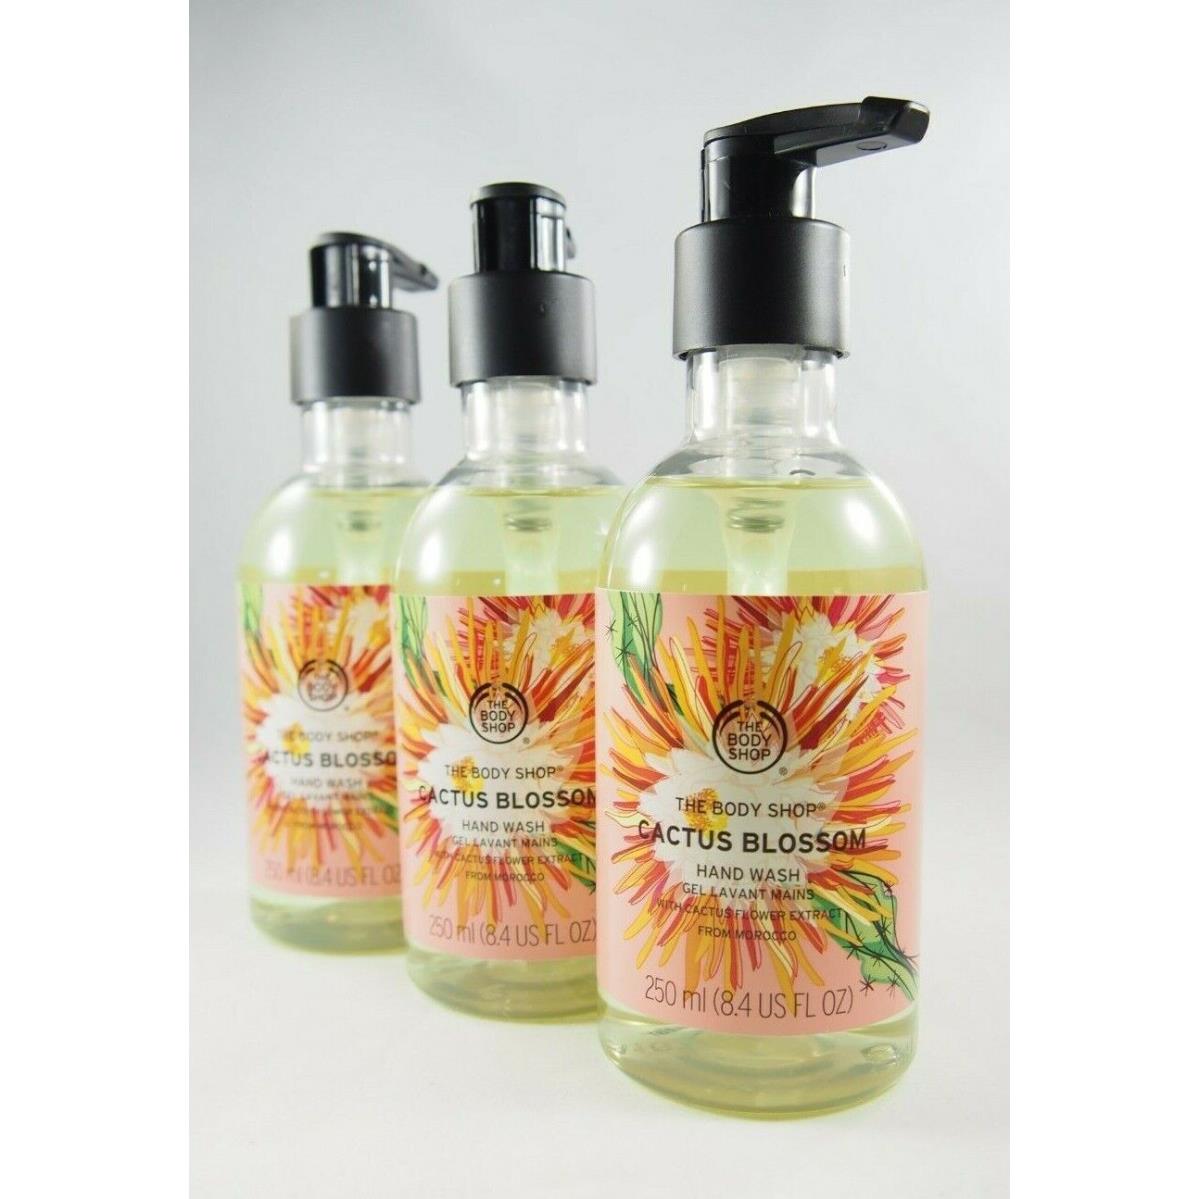 6 The Body Shop Limited Edition Cactus Blossom Hand Wash Soap 8.4oz